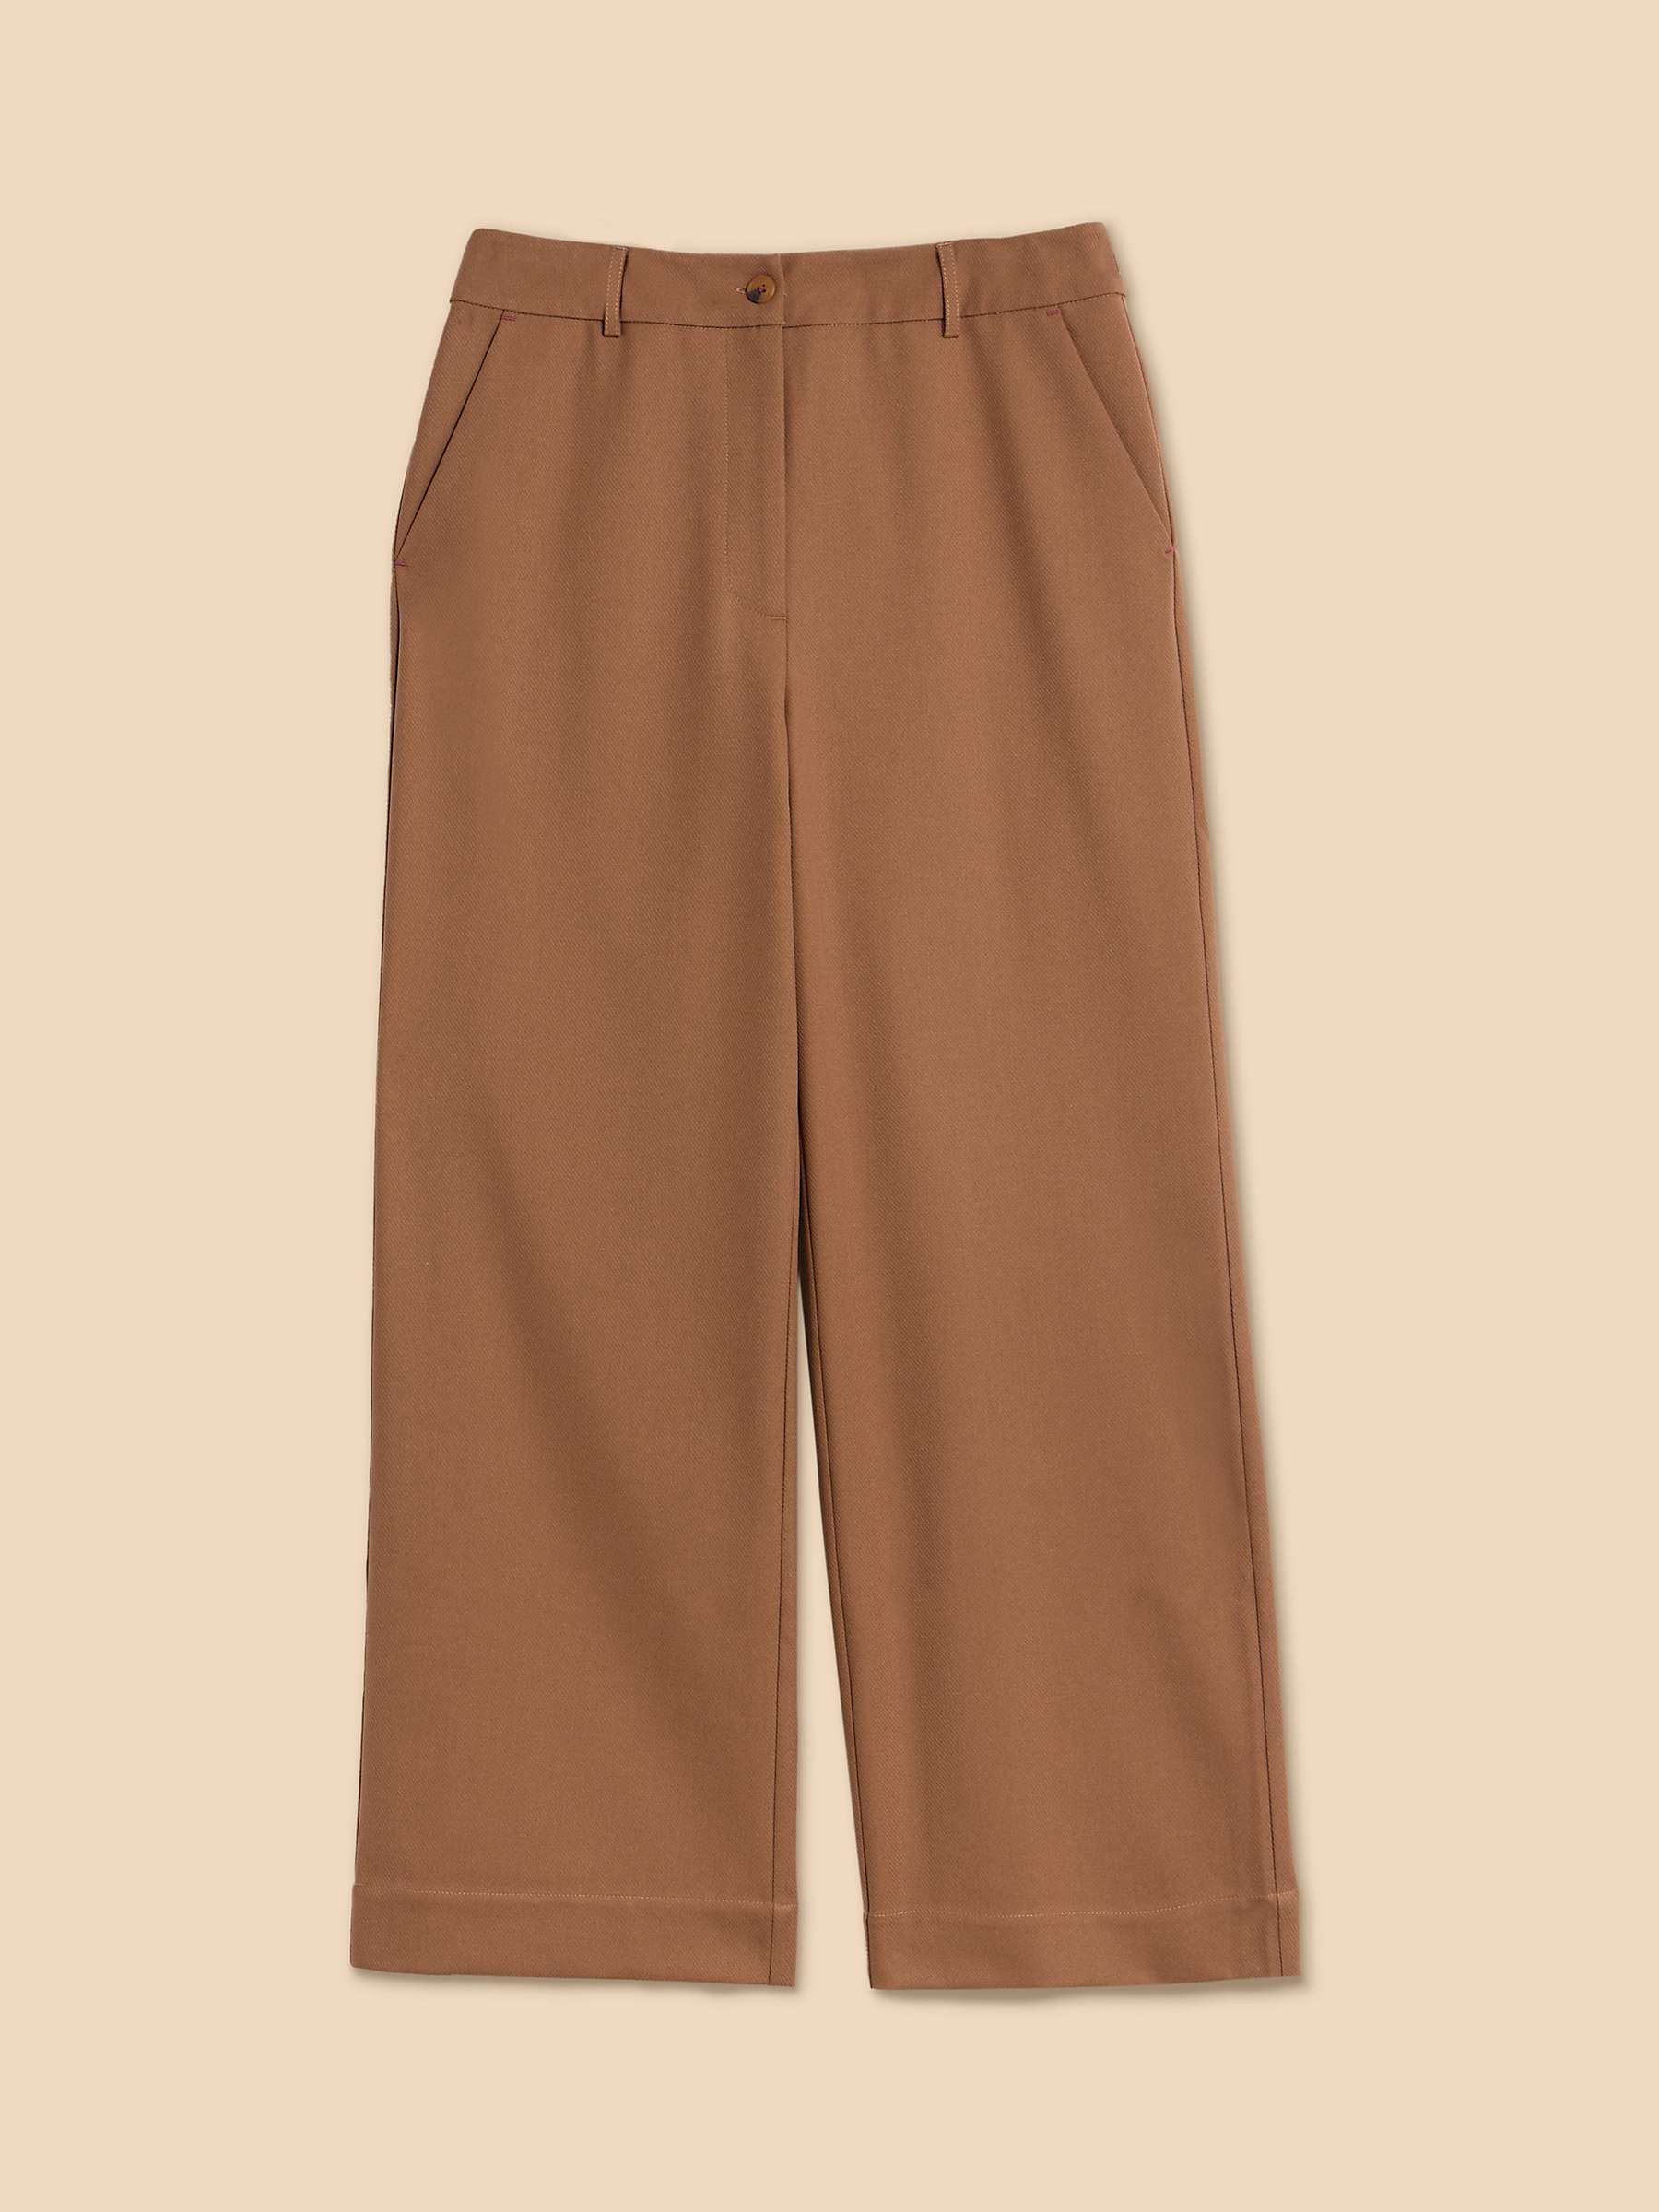 Buy White Stuff Tailored Wide Leg Trousers, Mid Tan Online at johnlewis.com